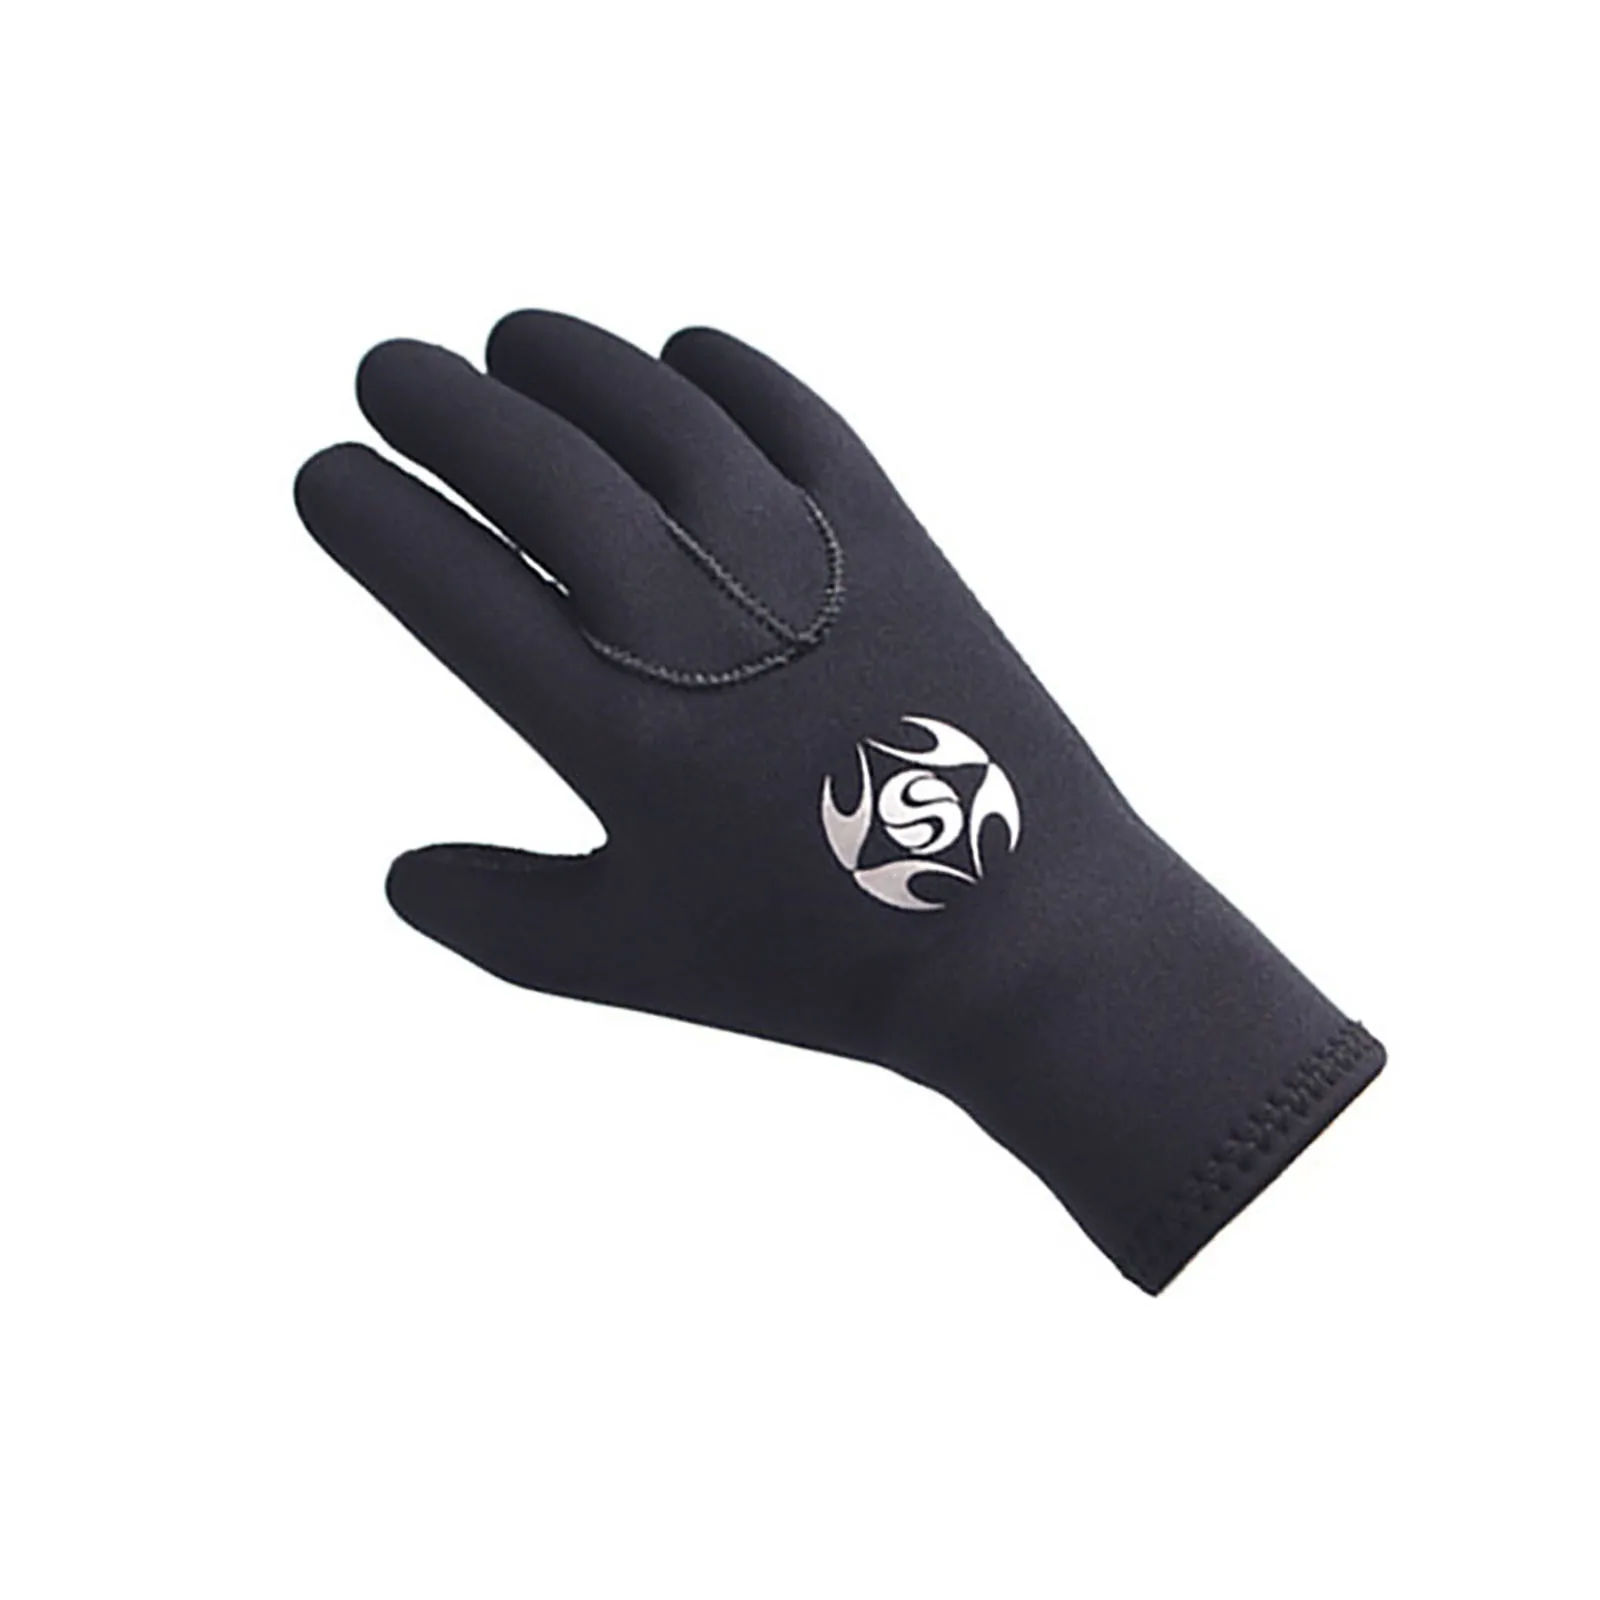 3mm wetsuit gloves All adult sizes avail. Titanium XStretch warm/grippy palm 